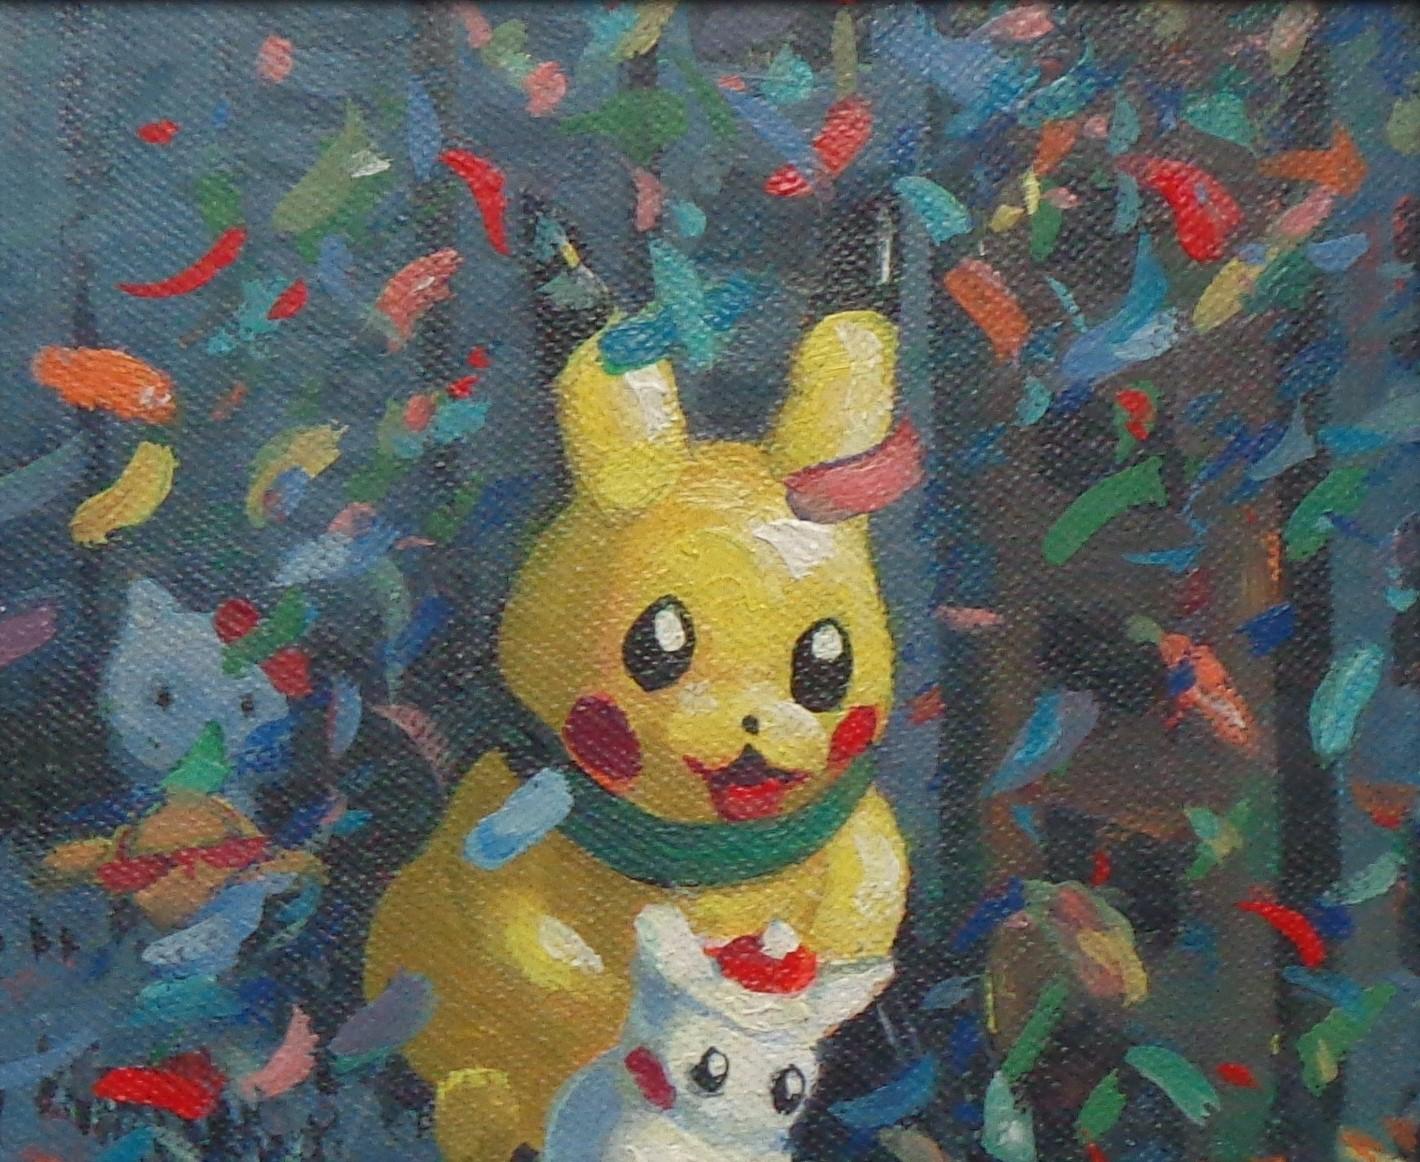   NYC Landscape Oil Painting Michael Budden Macy's Parade Series Pikachu For Sale 3